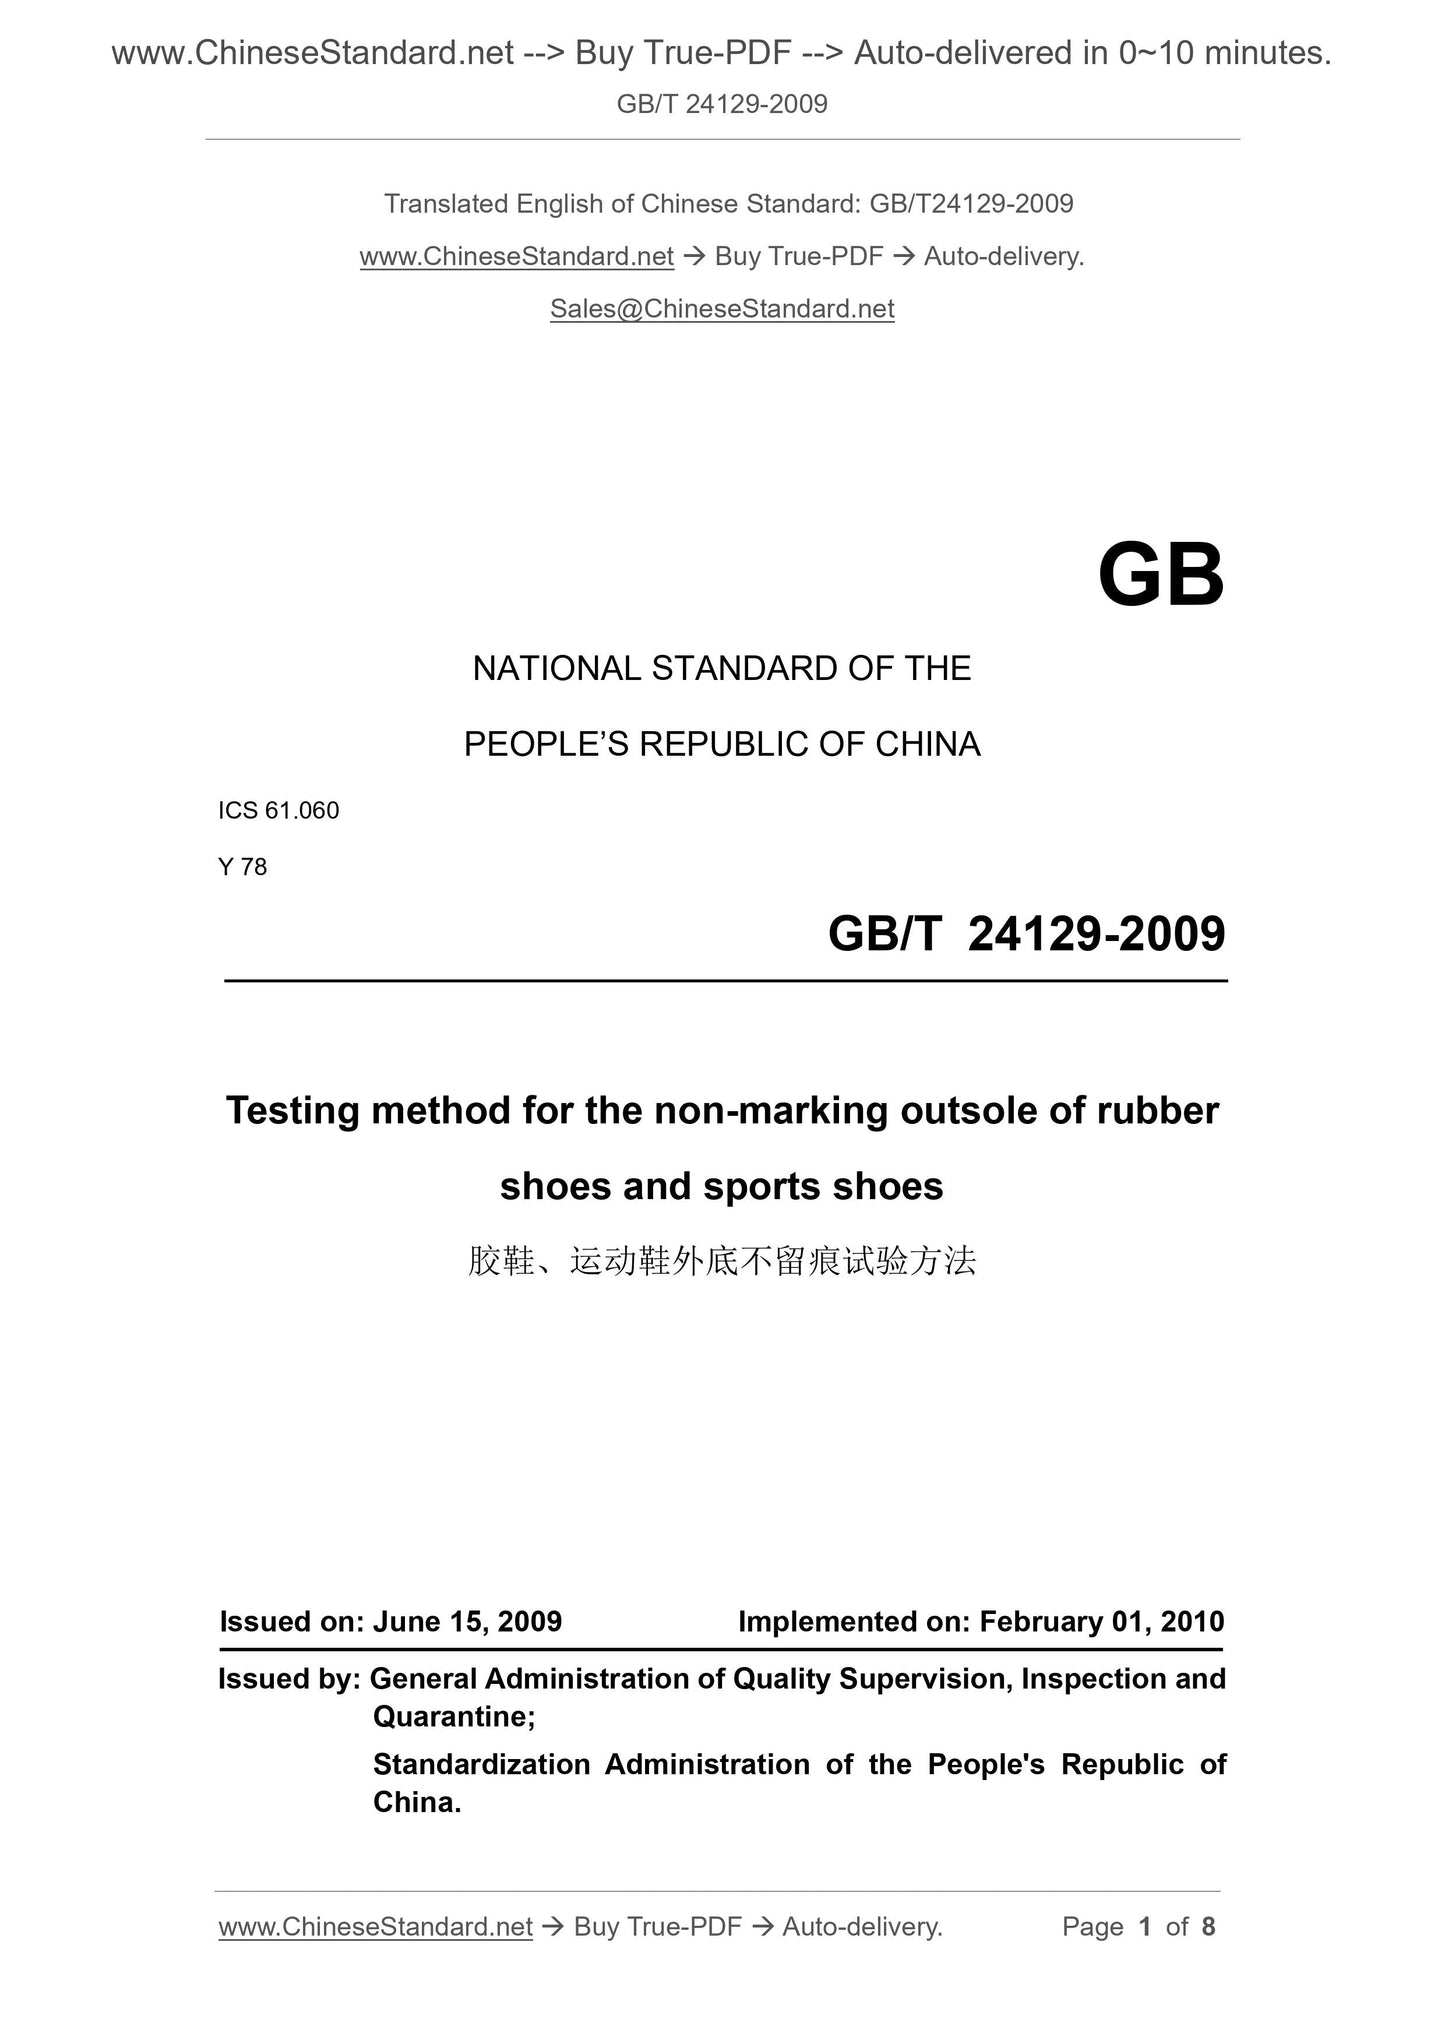 GB/T 24129-2009 Page 1